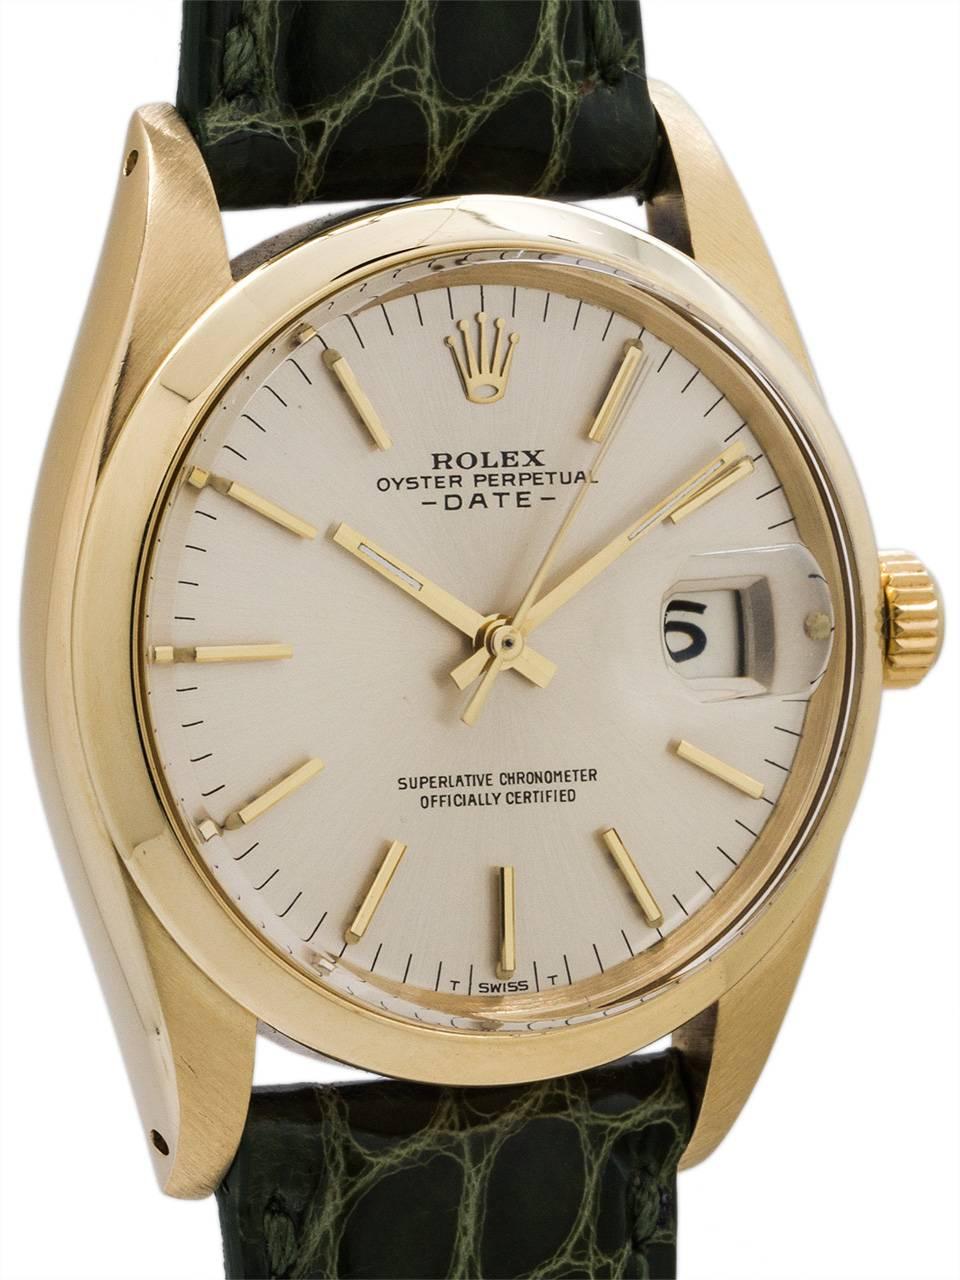 Rolex Yellow Gold Oyster Perpetual Date Automatic Wristwatch Ref 1500, c1967 In Excellent Condition For Sale In West Hollywood, CA